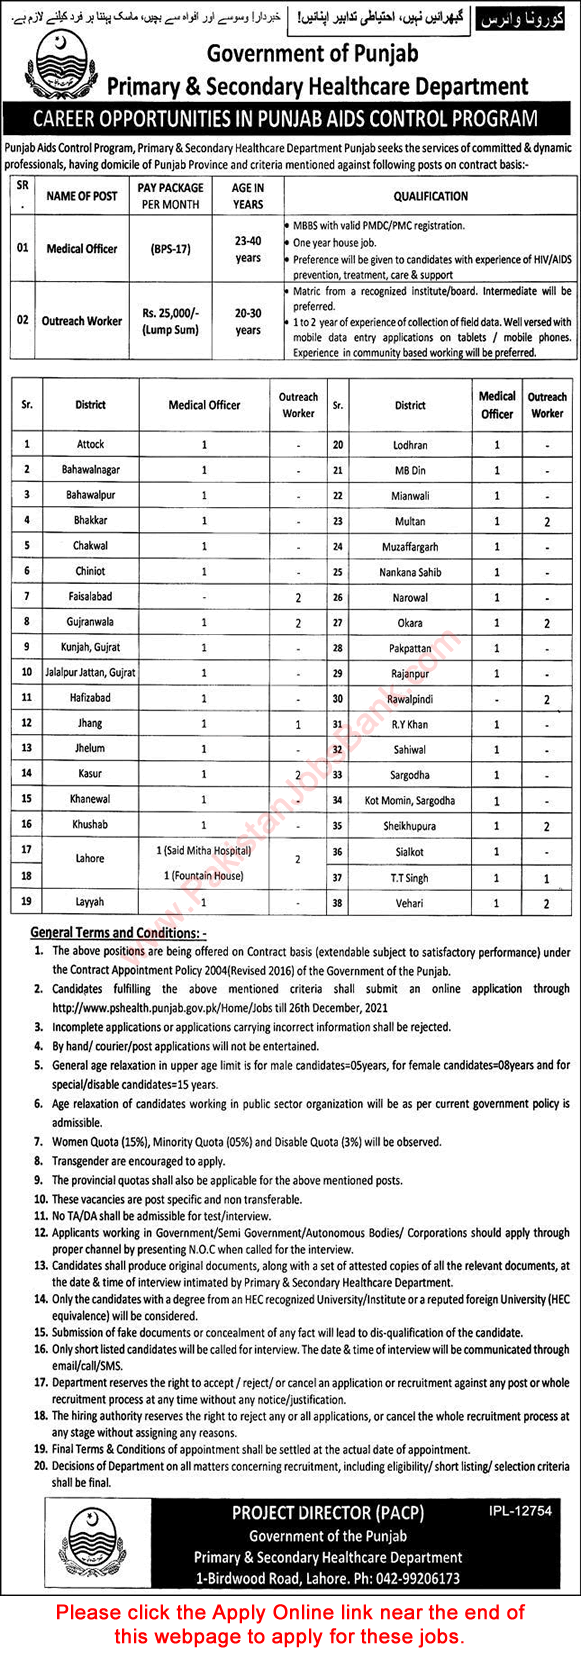 Primary and Secondary Healthcare Department Punjab Jobs December 2021 Apply Online Medical Officers & Outreach Workers Latest